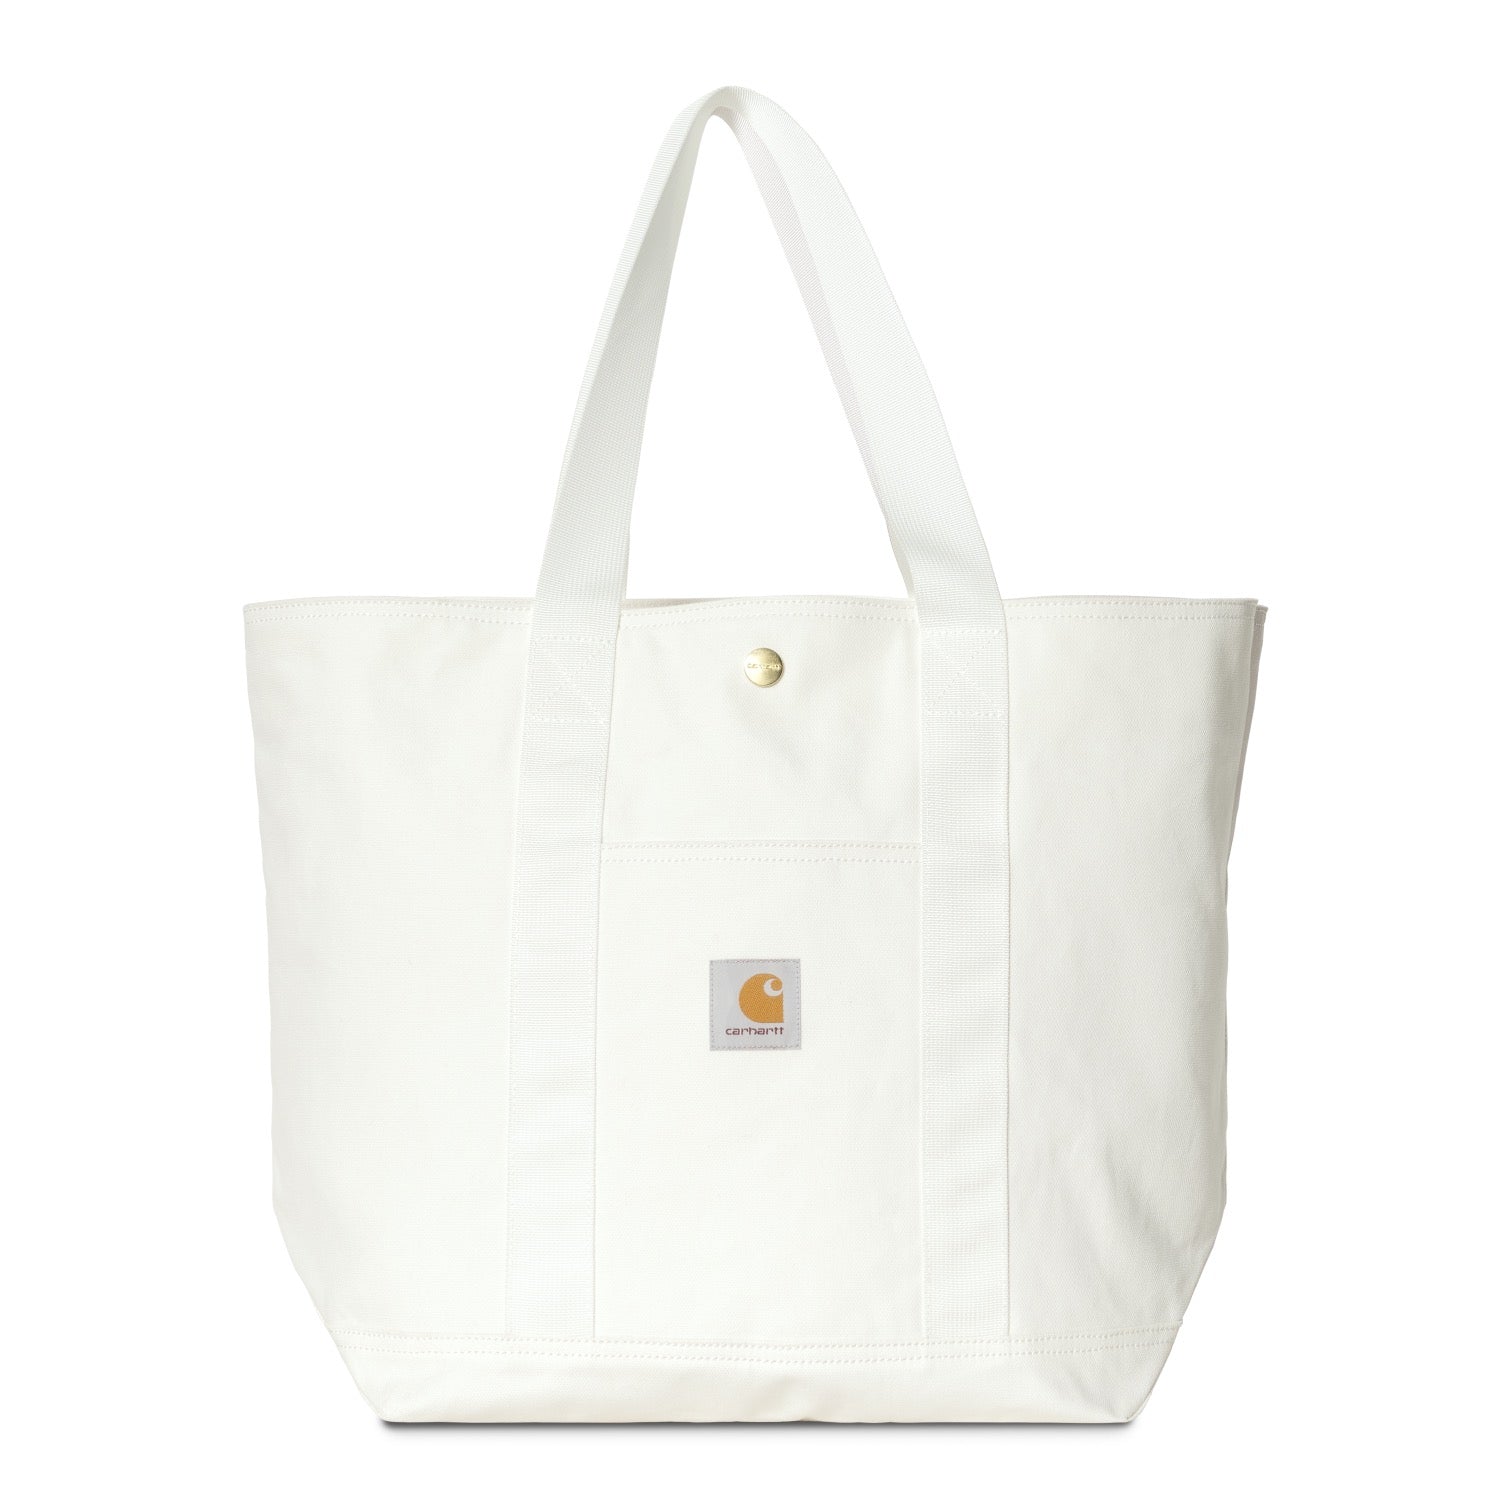 CANVAS TOTE - Wax (rinsed)